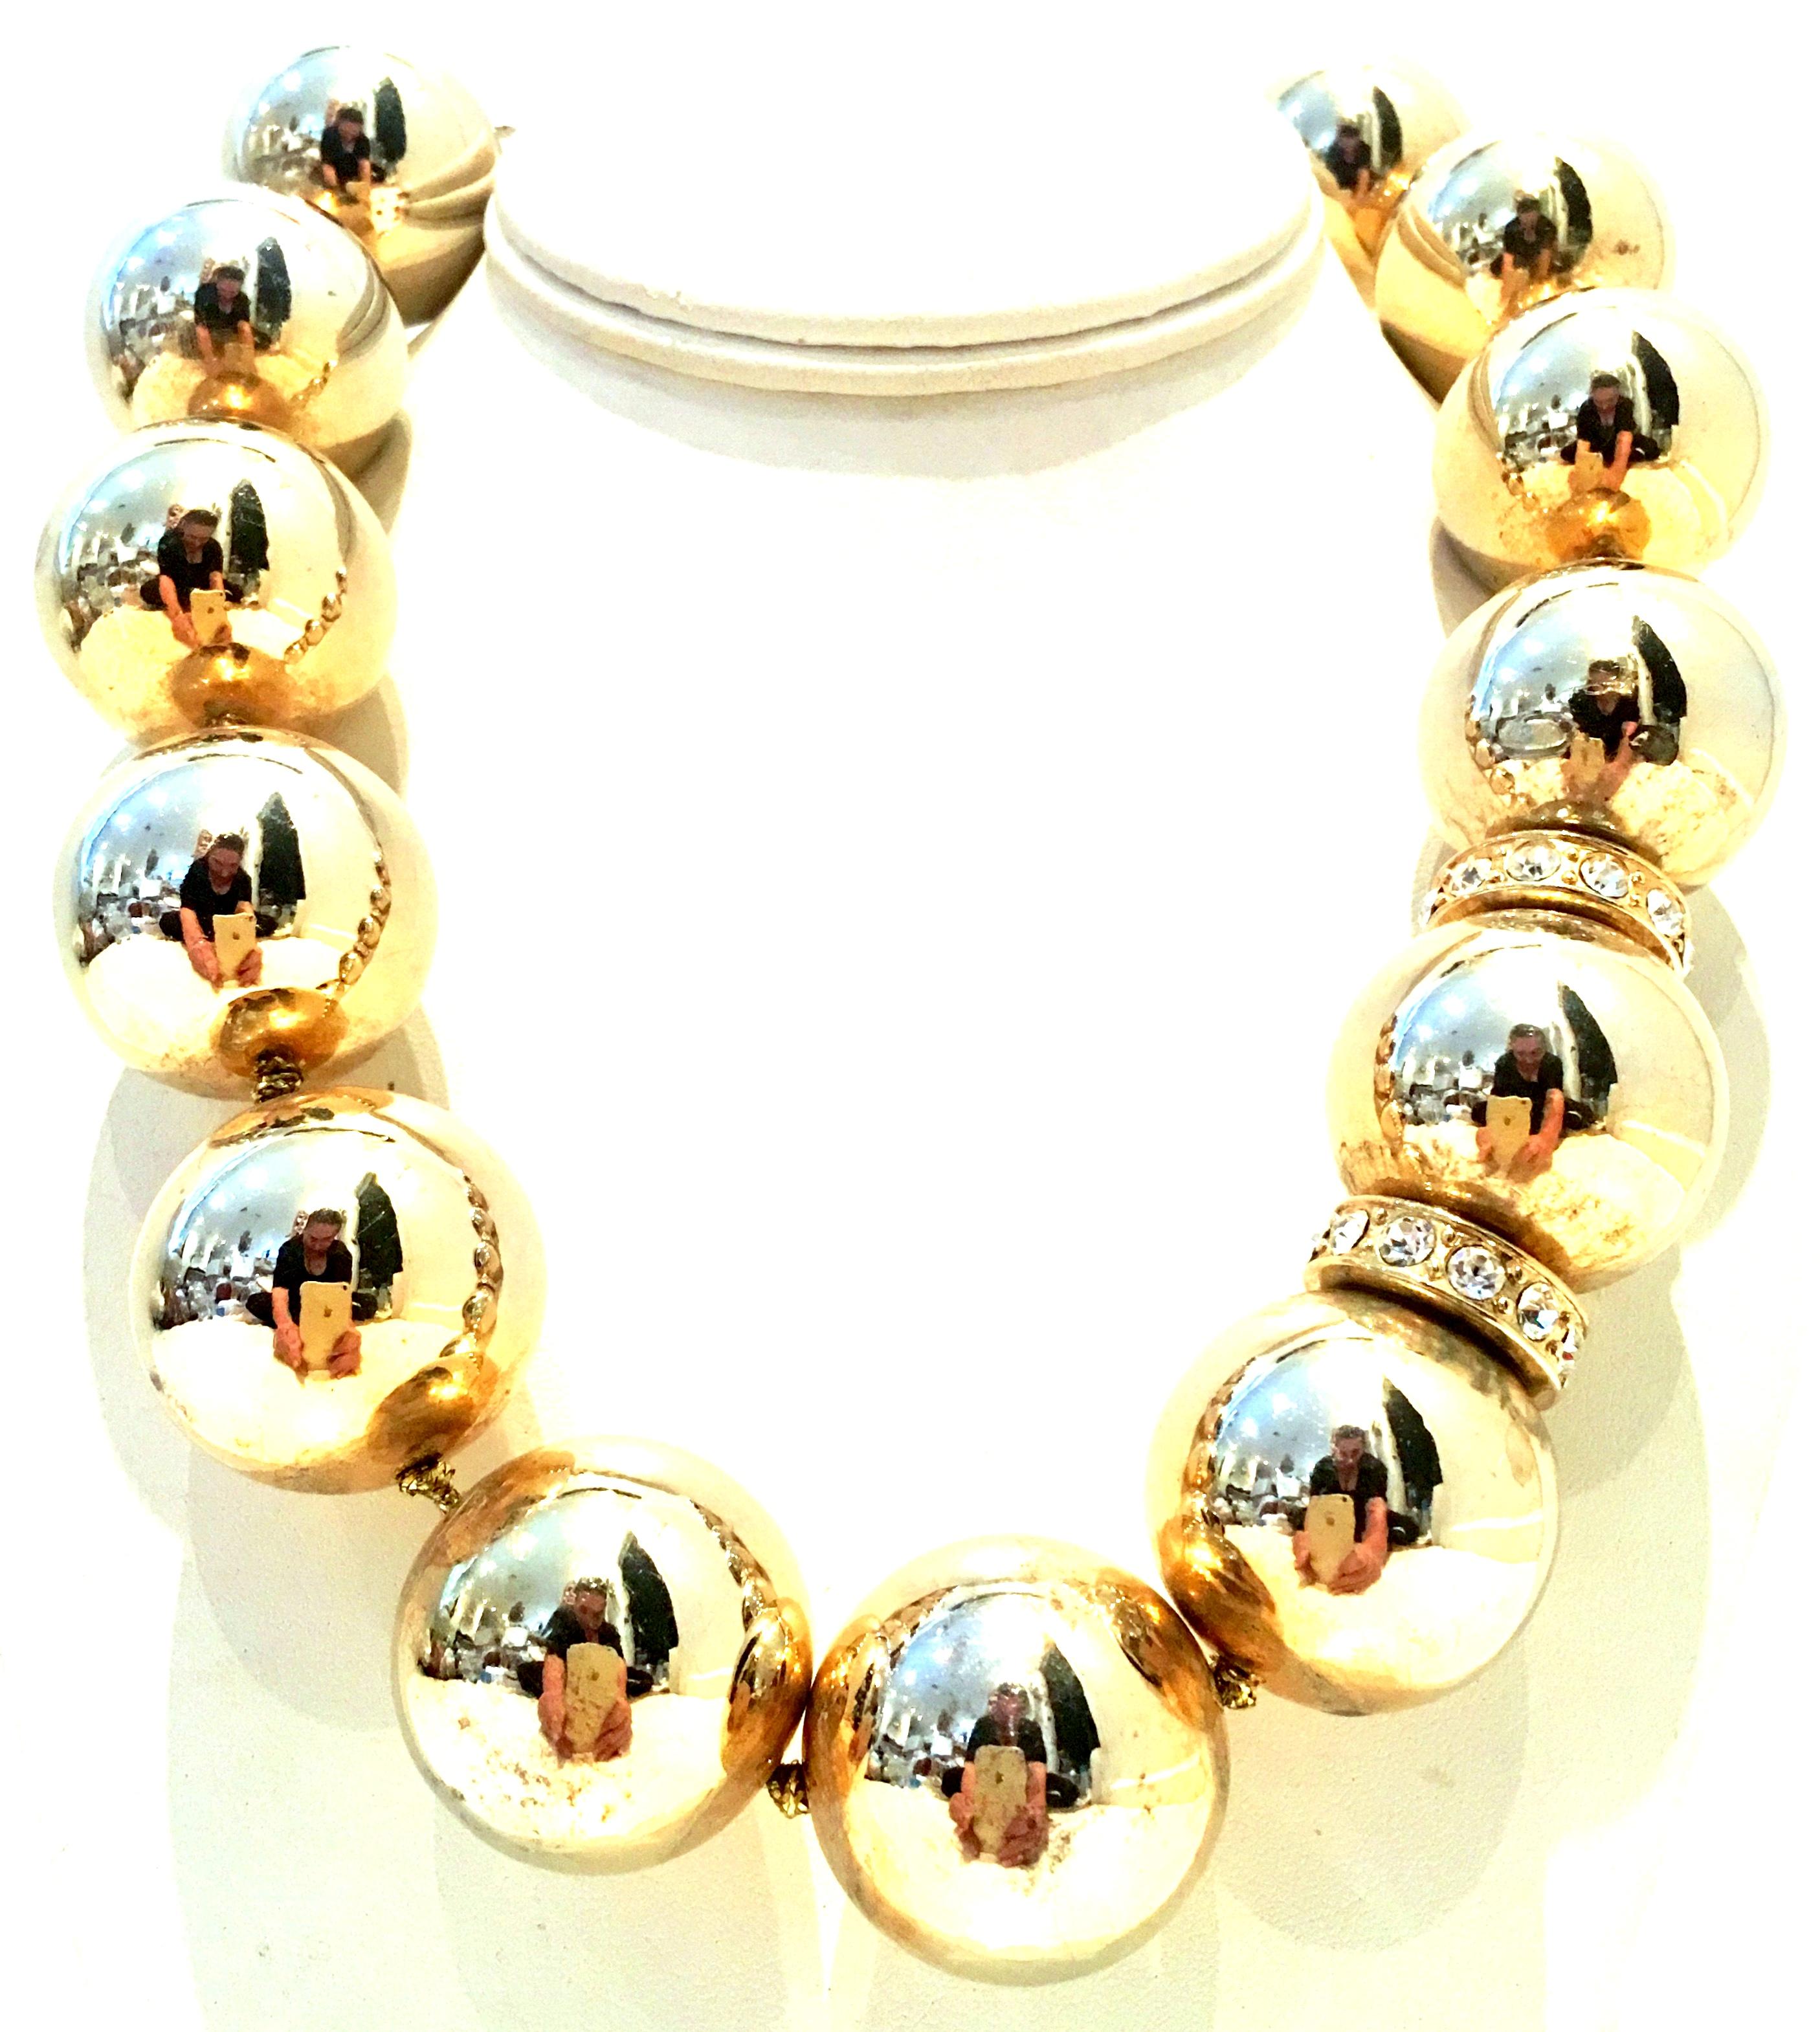 20th Century Monumental Gold Plate Bead & Austrian Crystal Choker Style Necklace By, Lee Angel. This classic, timeless and modernist twist on a monumental gold bead necklace adds a dramatic statement to any occasion. Features huge gold plate beads